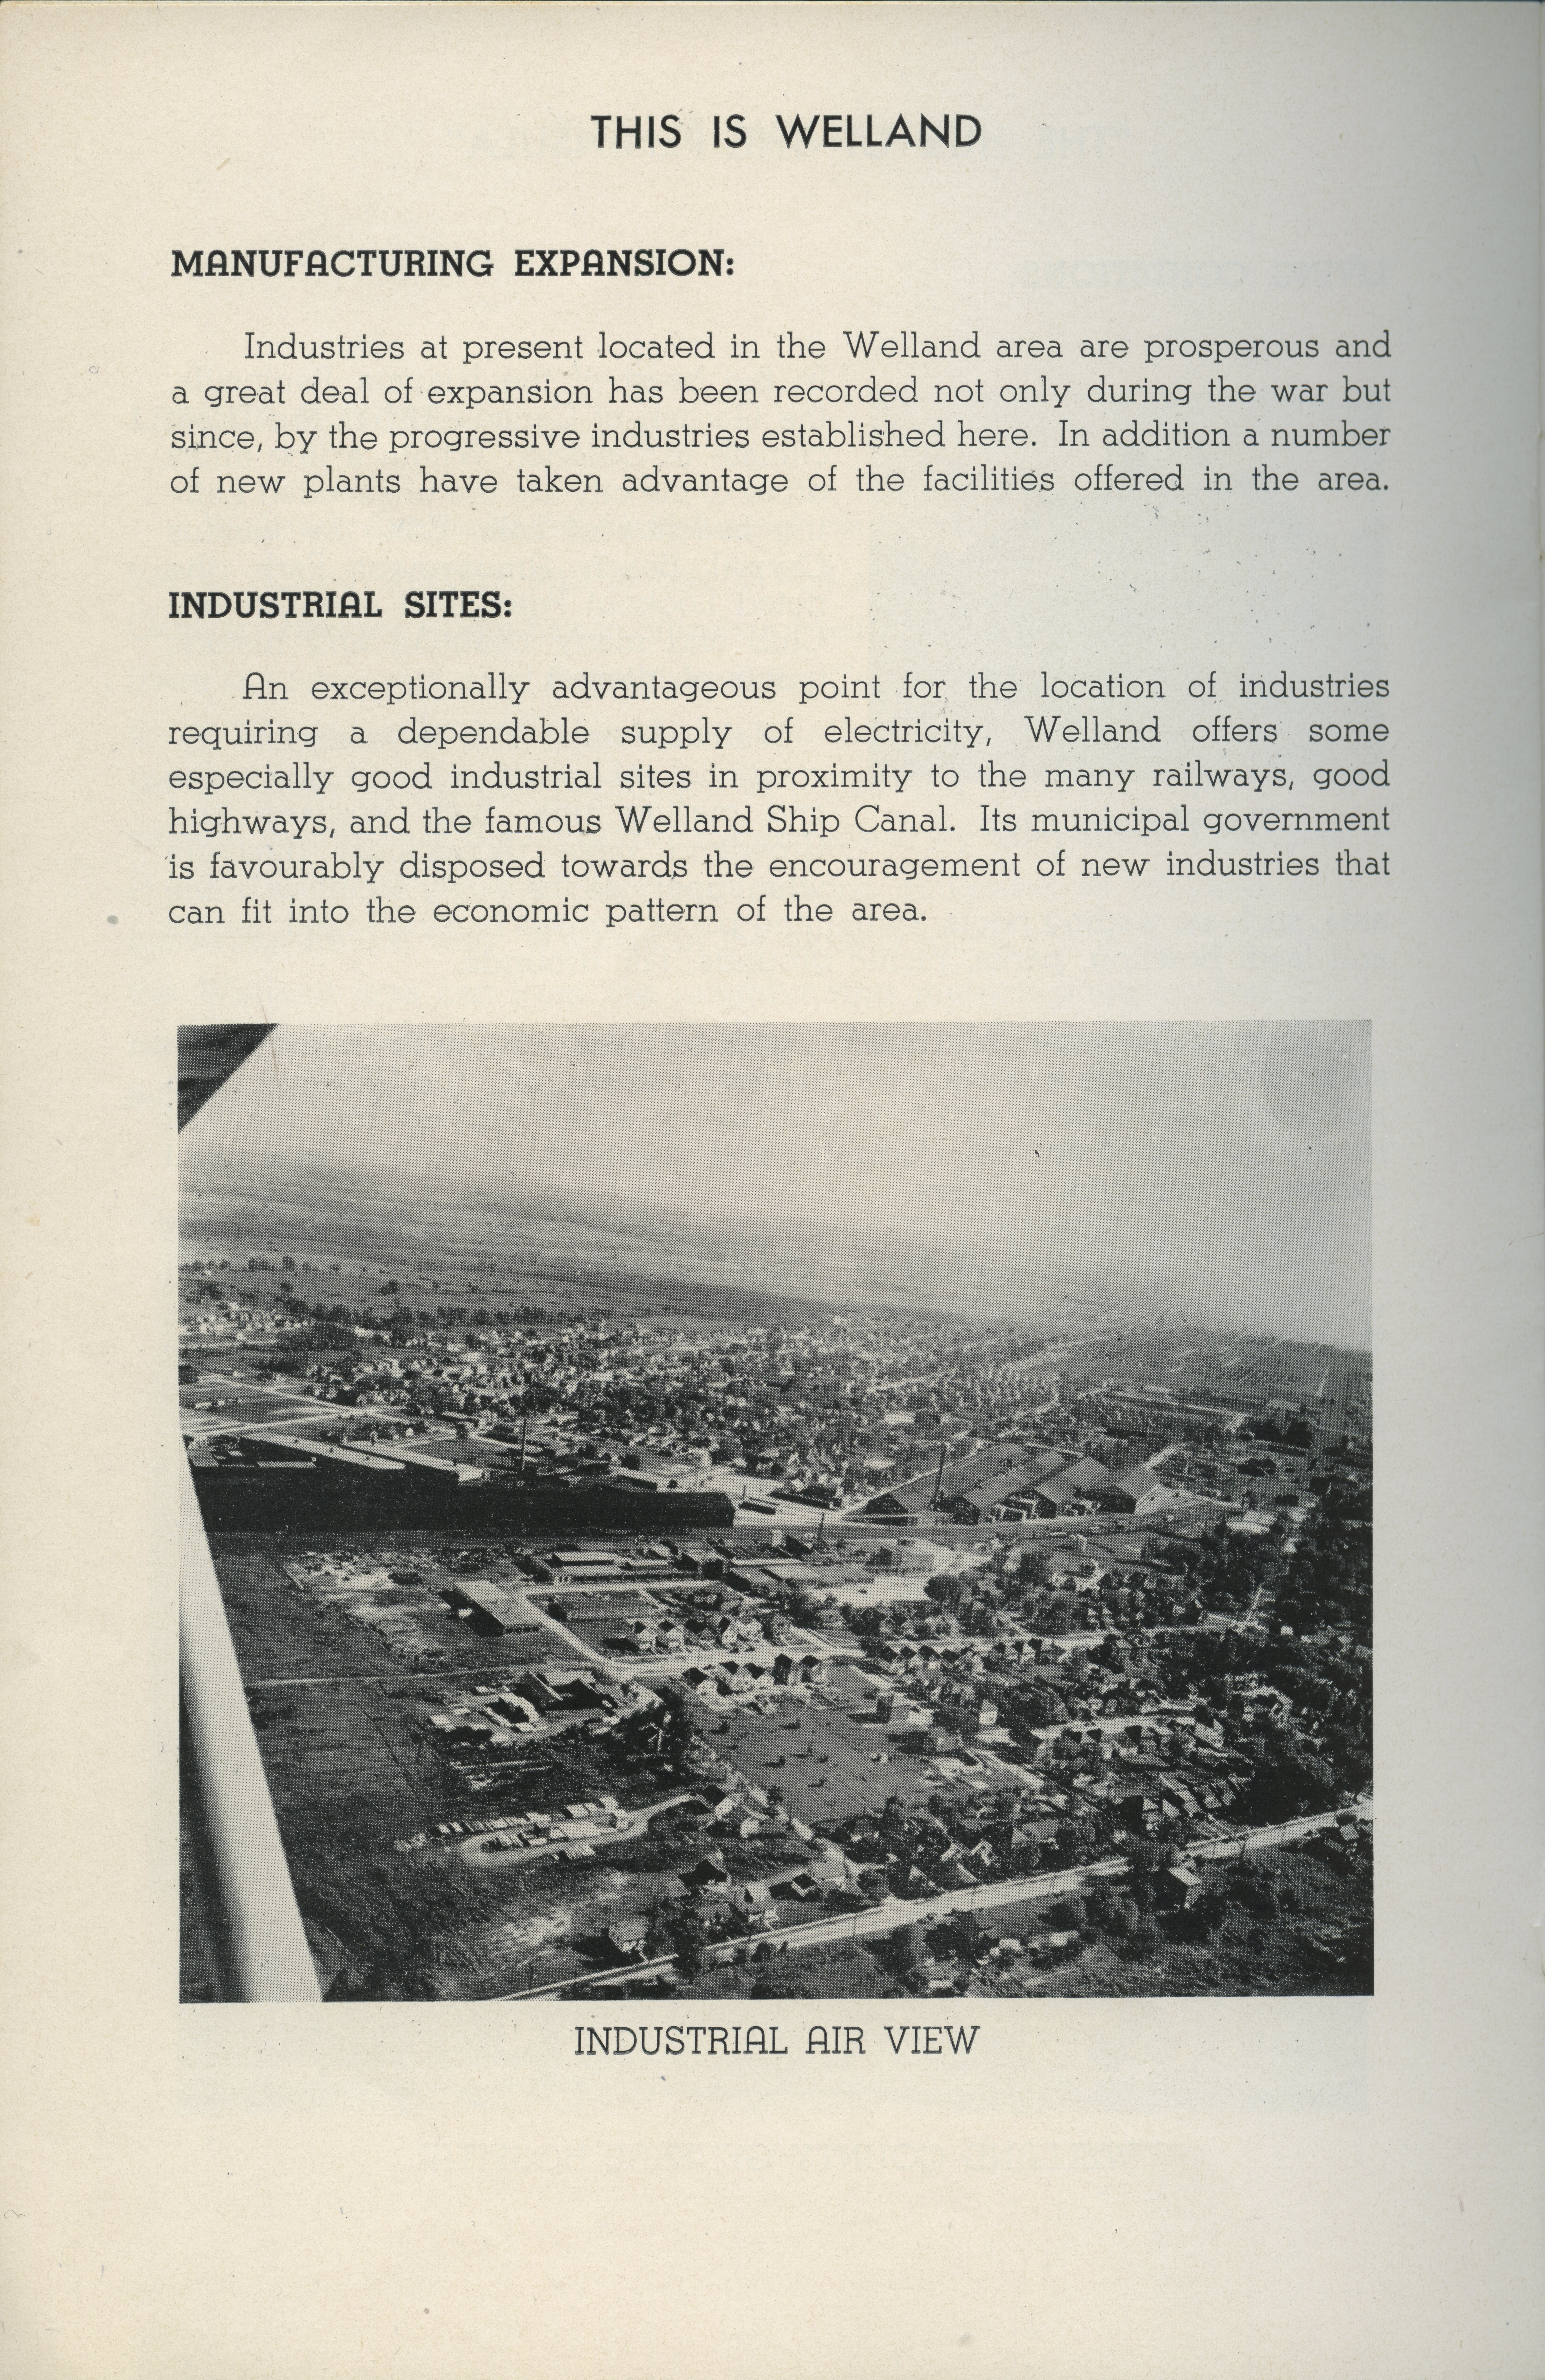 A page of a promotional brochure. It has some text and an aerial view of Welland.